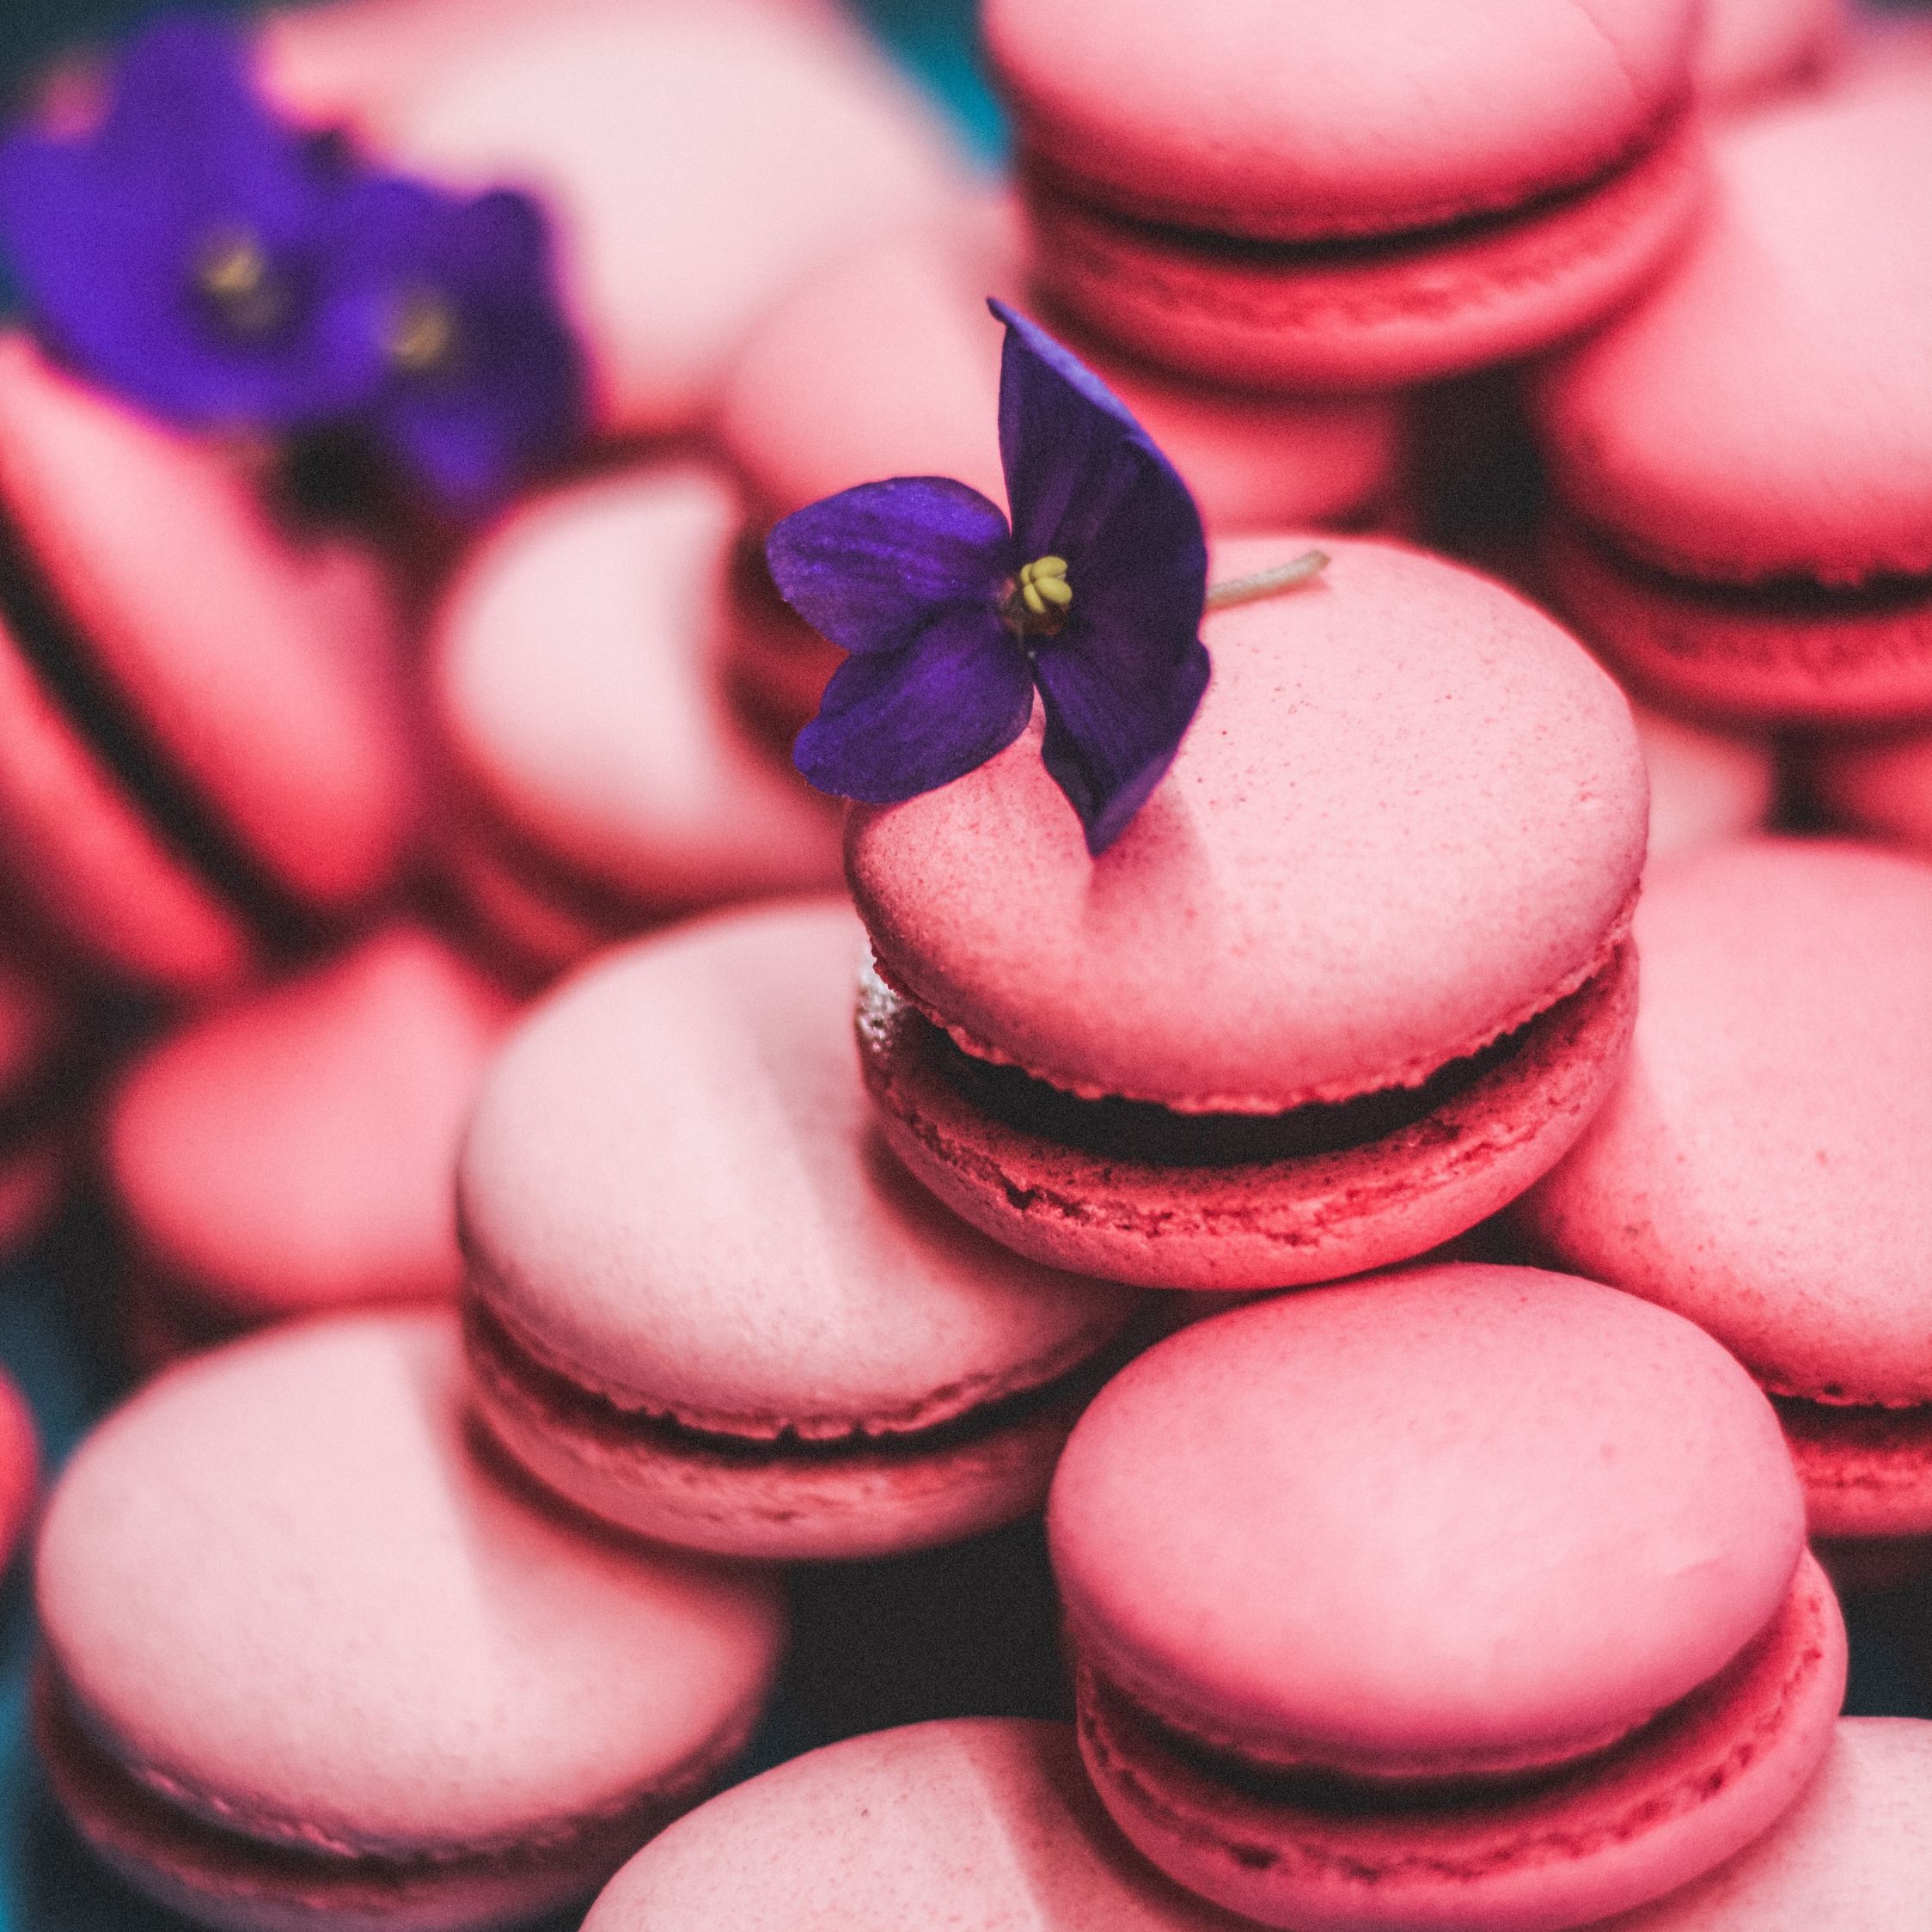 A stack of pink macaroons with purple flowers - Macarons